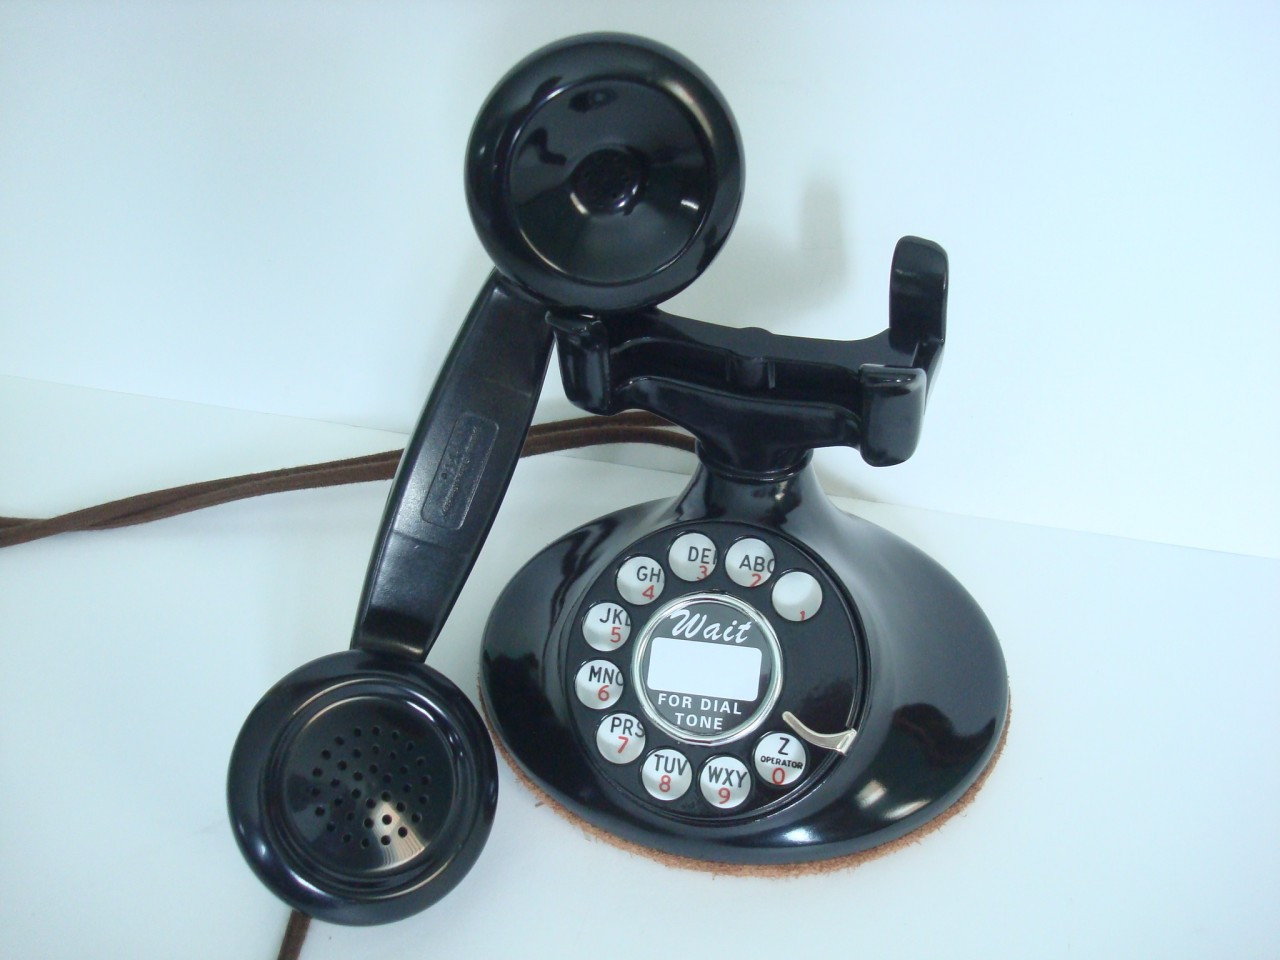 Western Electric 2 With F1 Handset Was Made In The 1930s And Comes Fully Restored Old Phone Shop